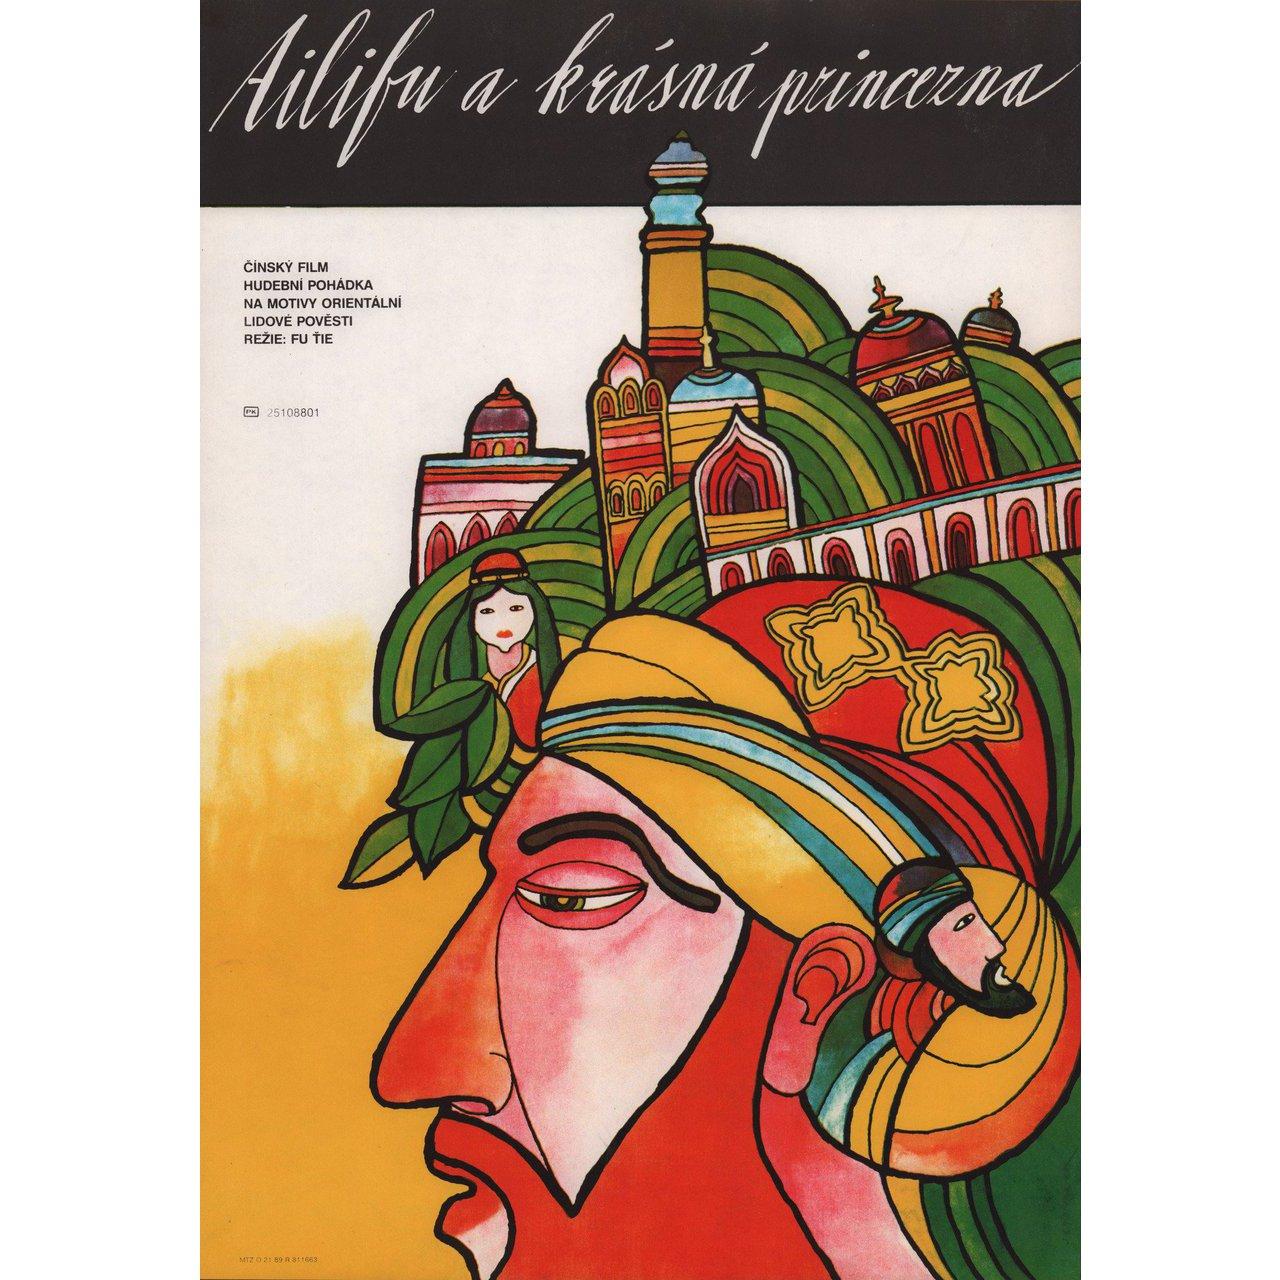 Original 1989 Slovakian A3 poster by Jan S. Tomanek for Fine condition, rolled. Please note: the size is stated in inches and the actual size can vary by an inch or more.
   